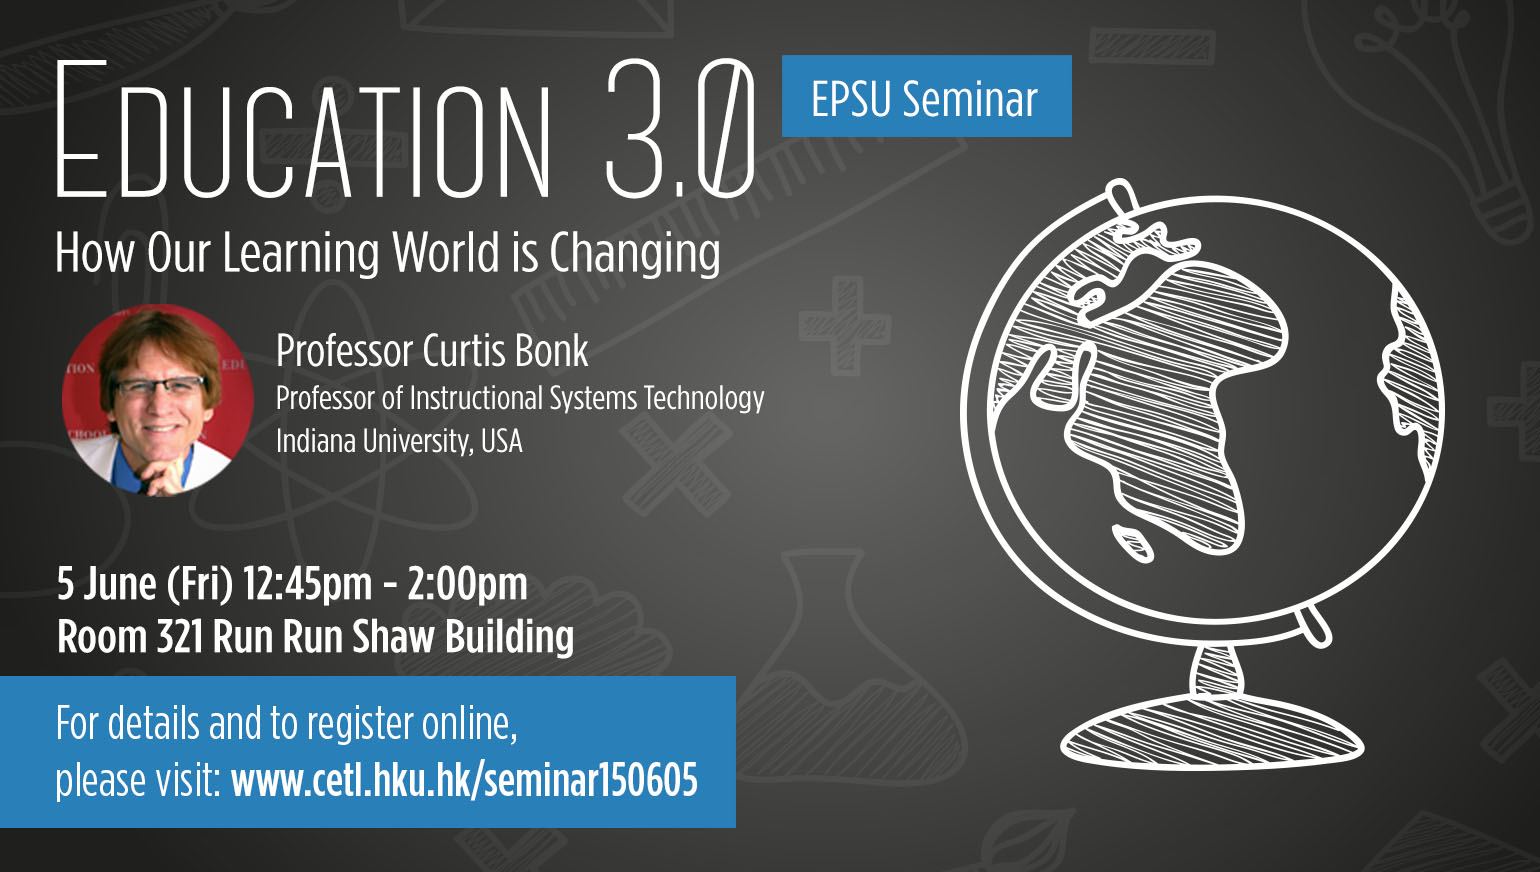 EPSU Seminar - Education 3.0: How Our Learning World is Changing 